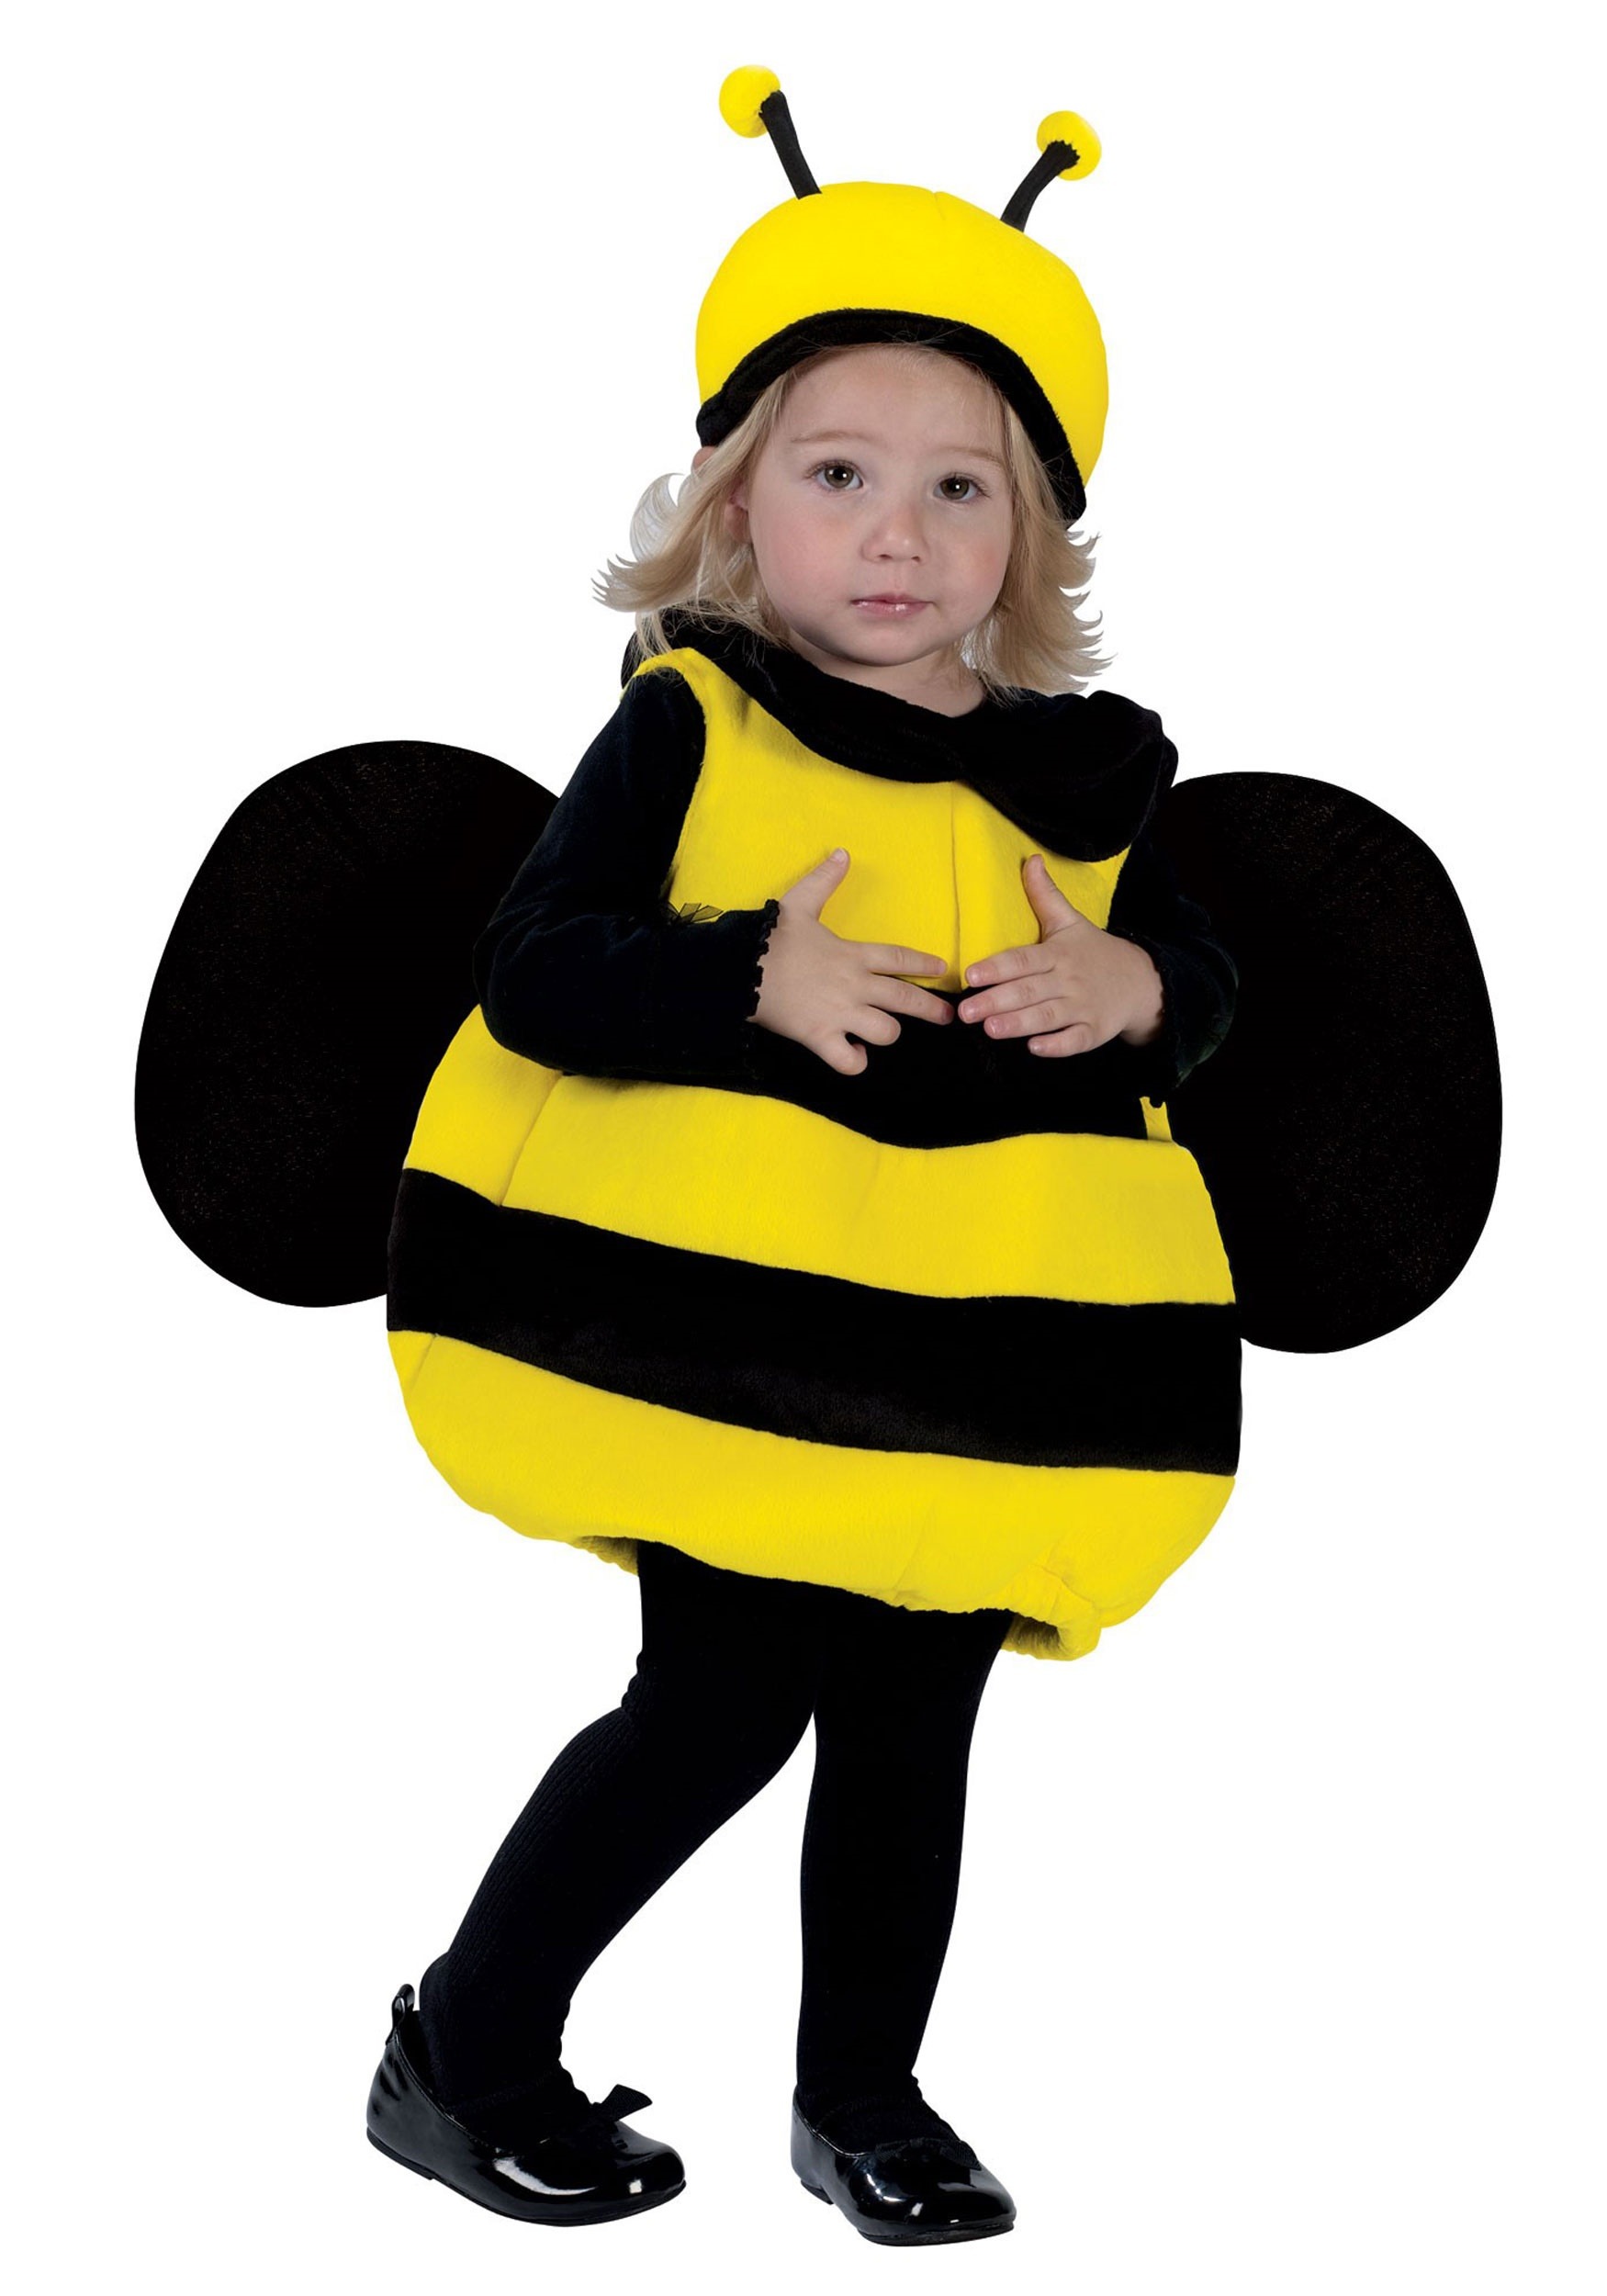 Photos - Fancy Dress Bubble Fun World Bumble Bee  Costume for Toddler's Black/Yellow FU9653 